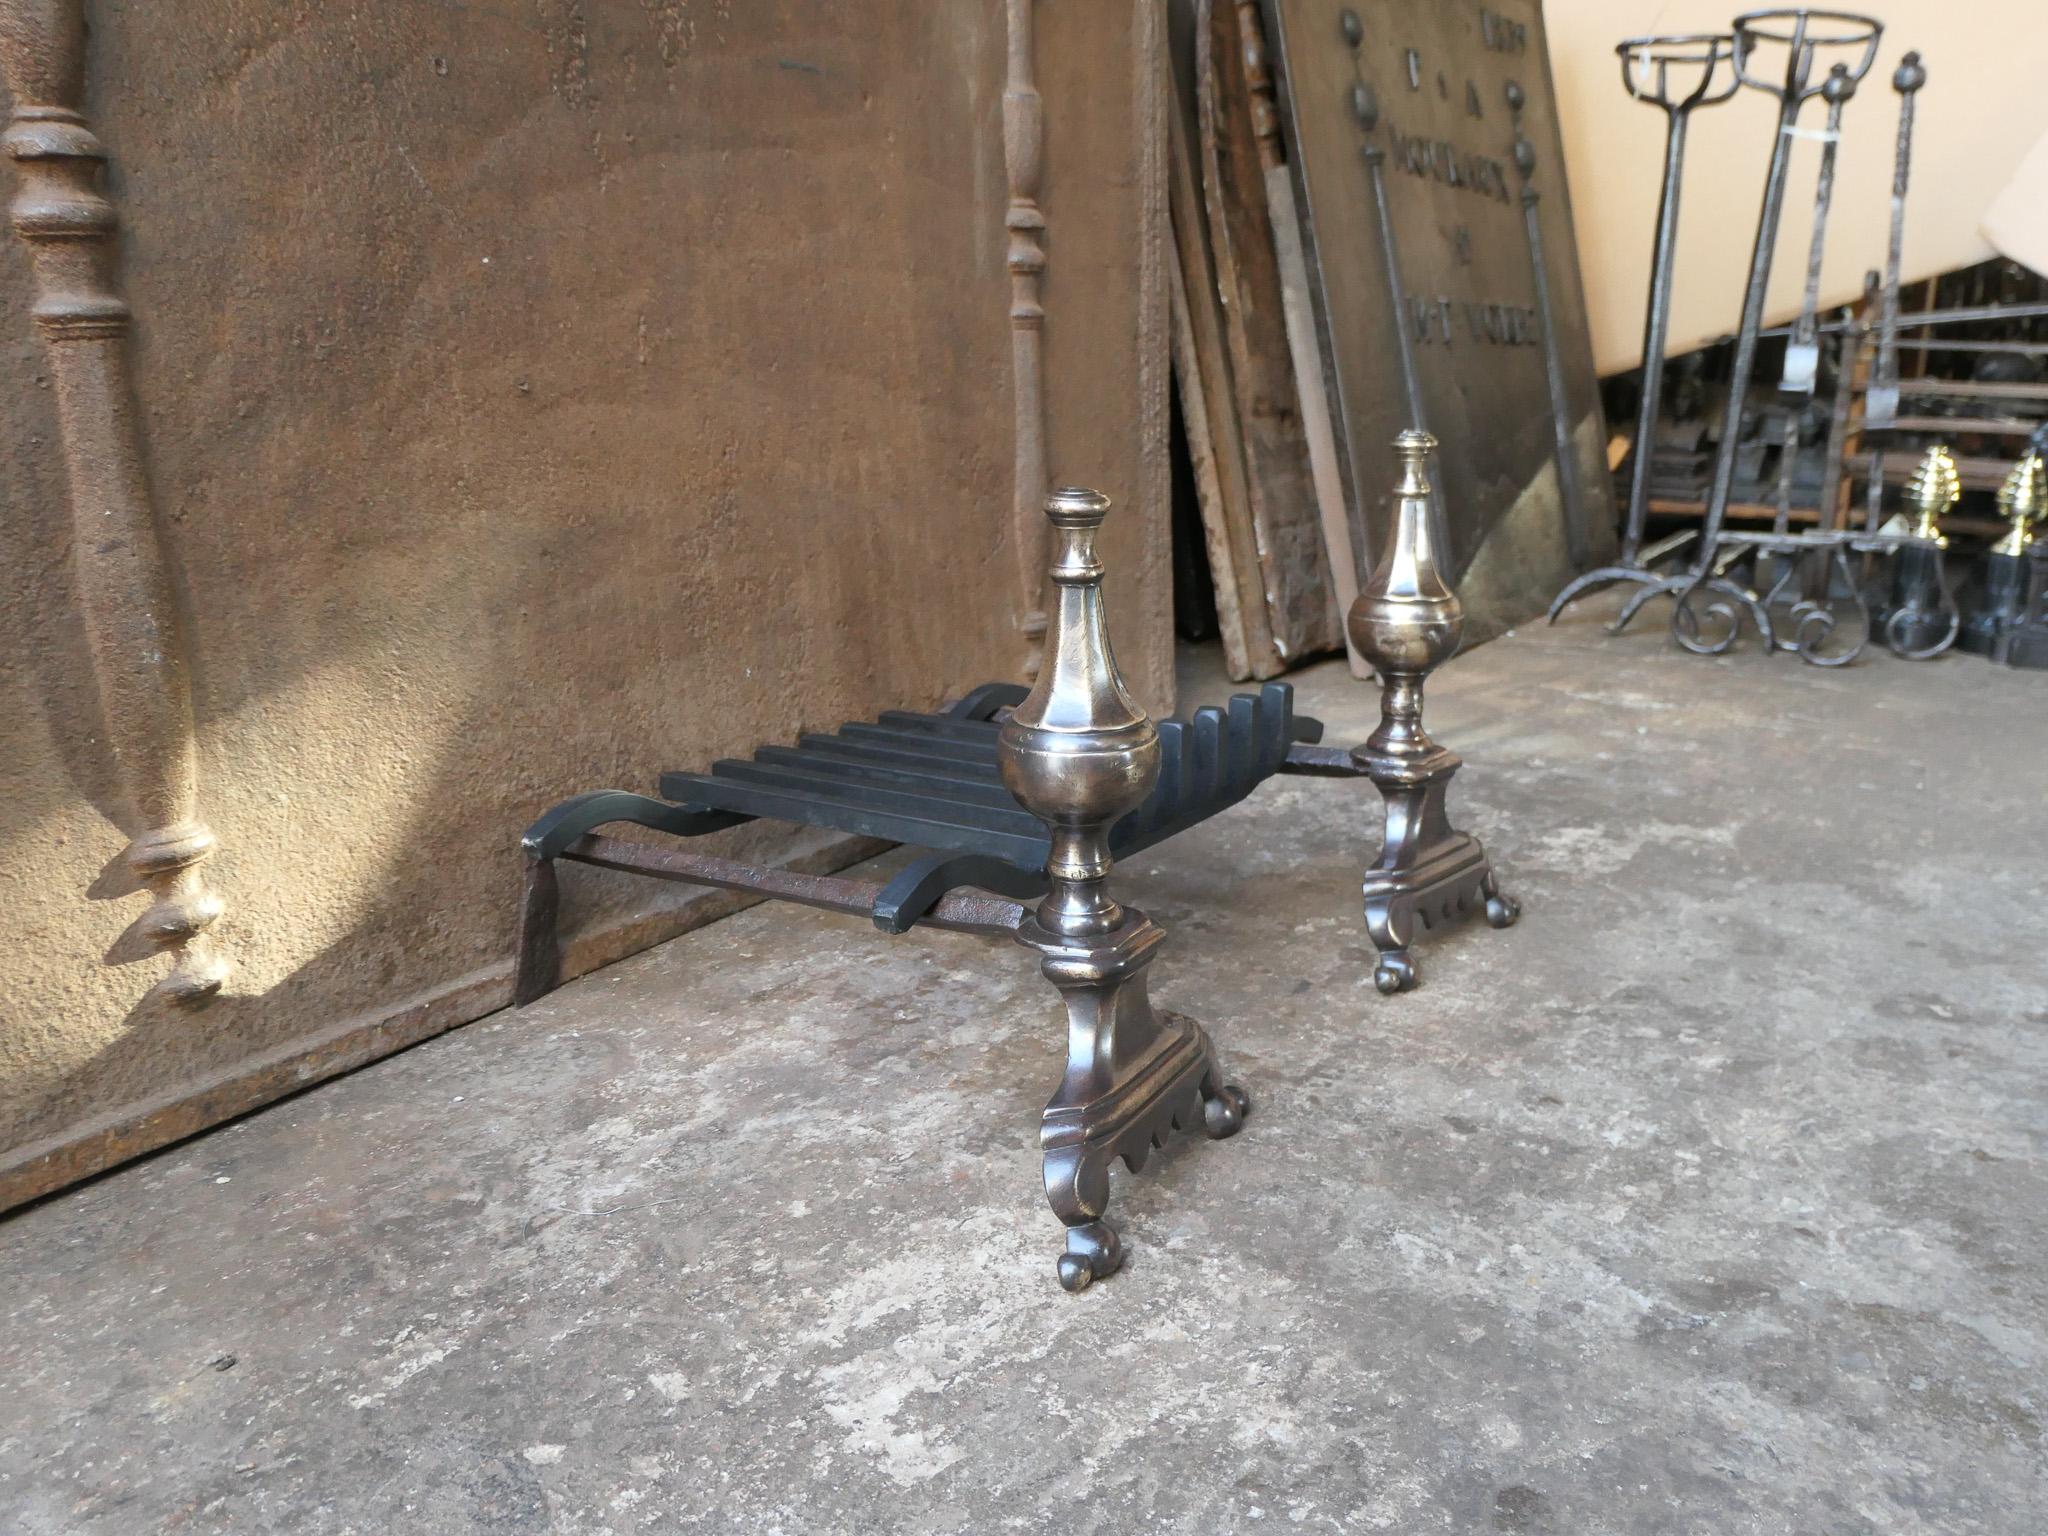 French Louis XIV Period Fireplace Andirons or Fire Grate, 17th Century For Sale 6